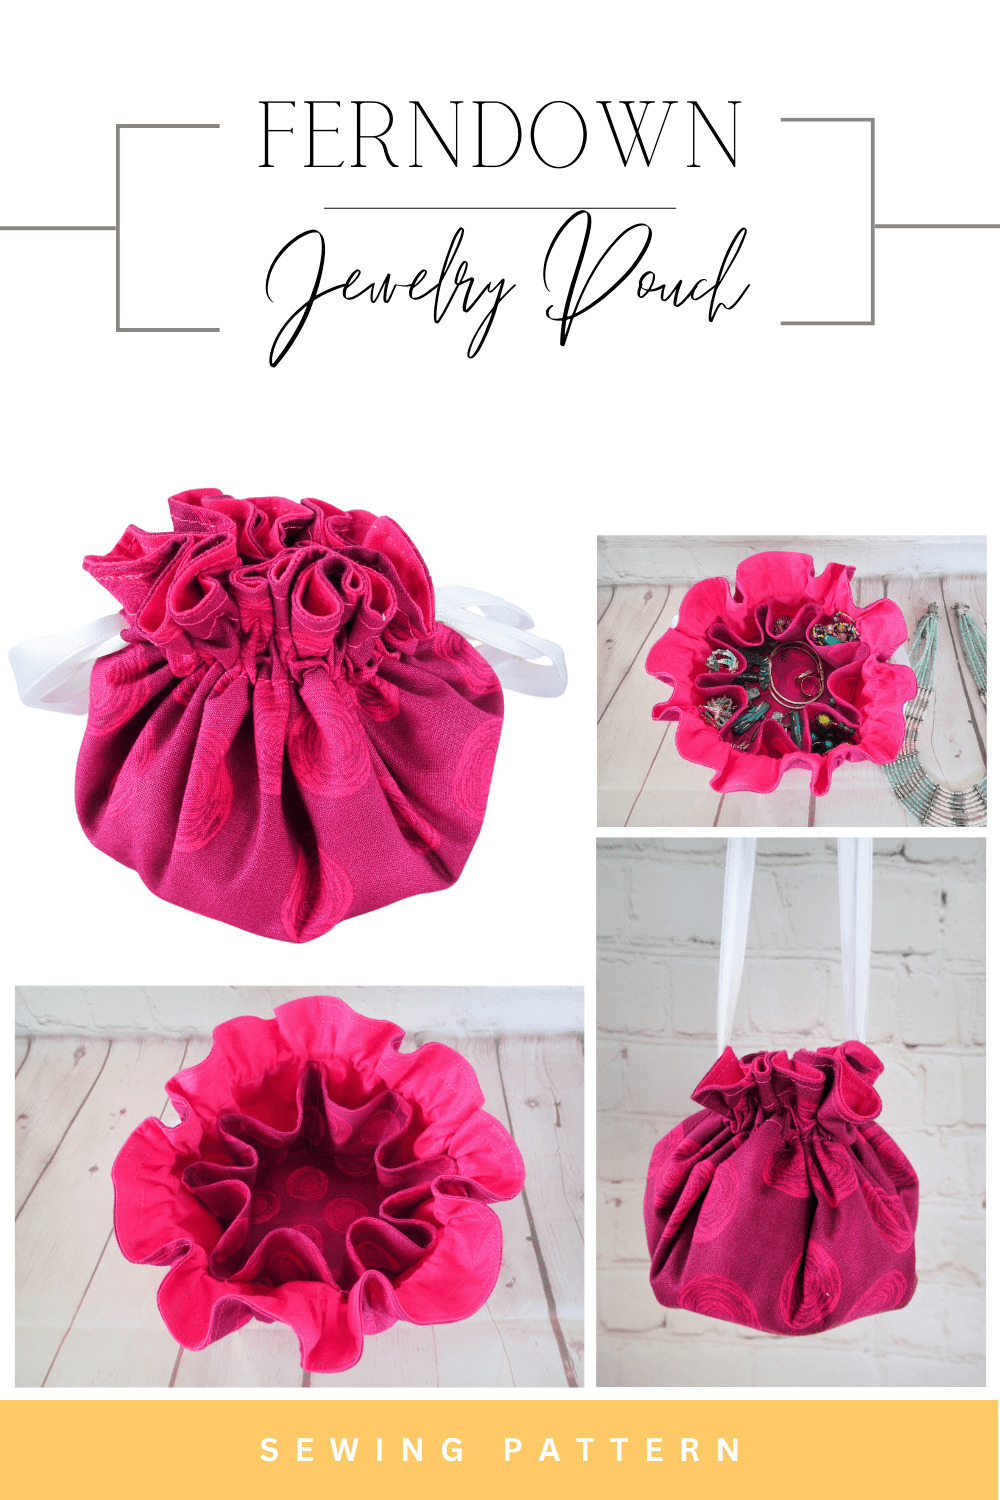 How to Make a Circular Jewelry Pouch 